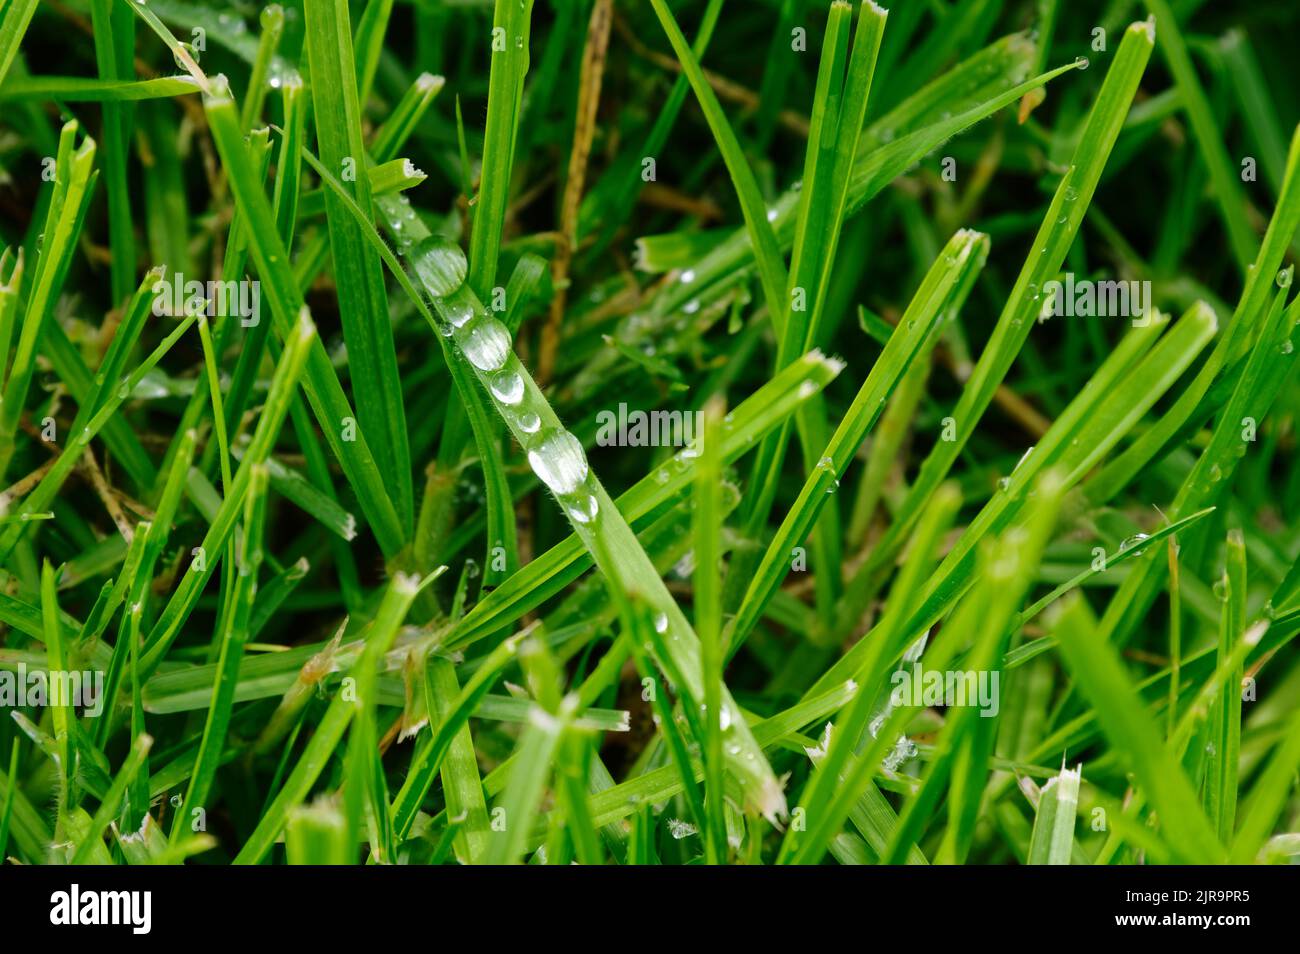 Water droplets hang onto a blade of grass. Stock Photo